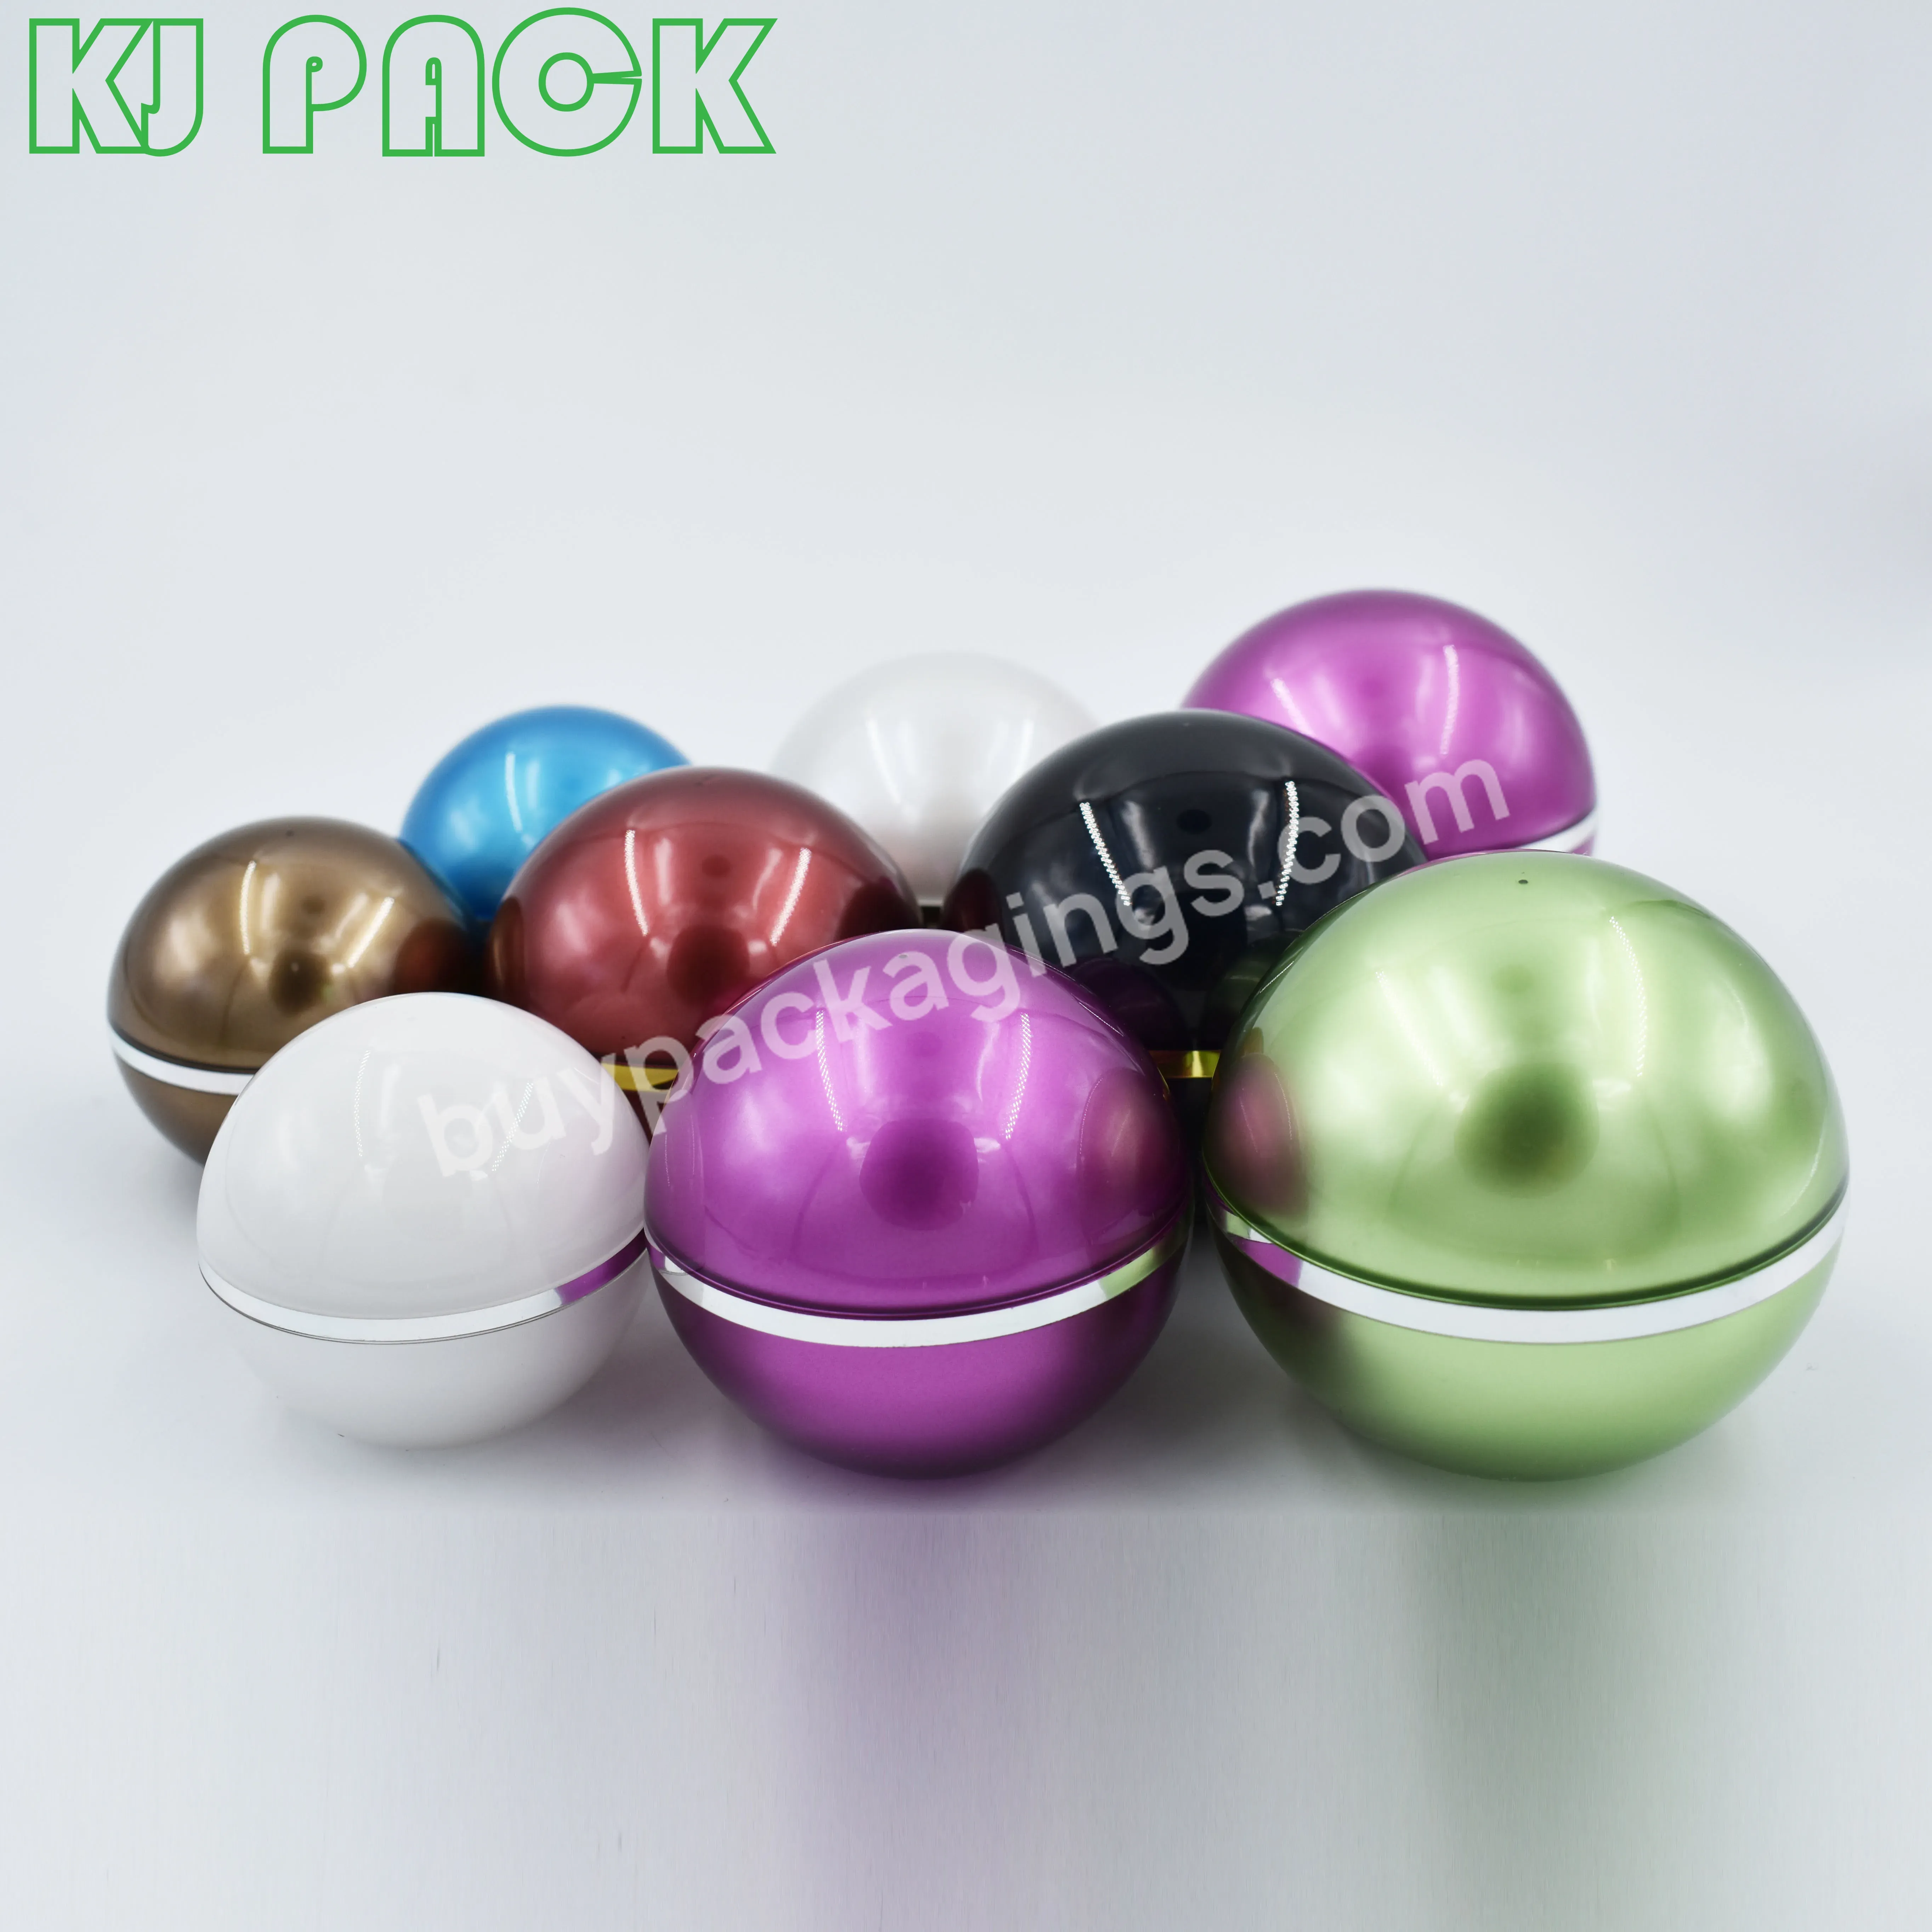 In Stock Luxury Skin Care Container Acrylic Beauty Package Design 5g 10g Spherical Round Cream Jar - Buy Round Acrylic Cream Jar,Round Acrylic Cream Jar,Round Acrylic Cream Jar.